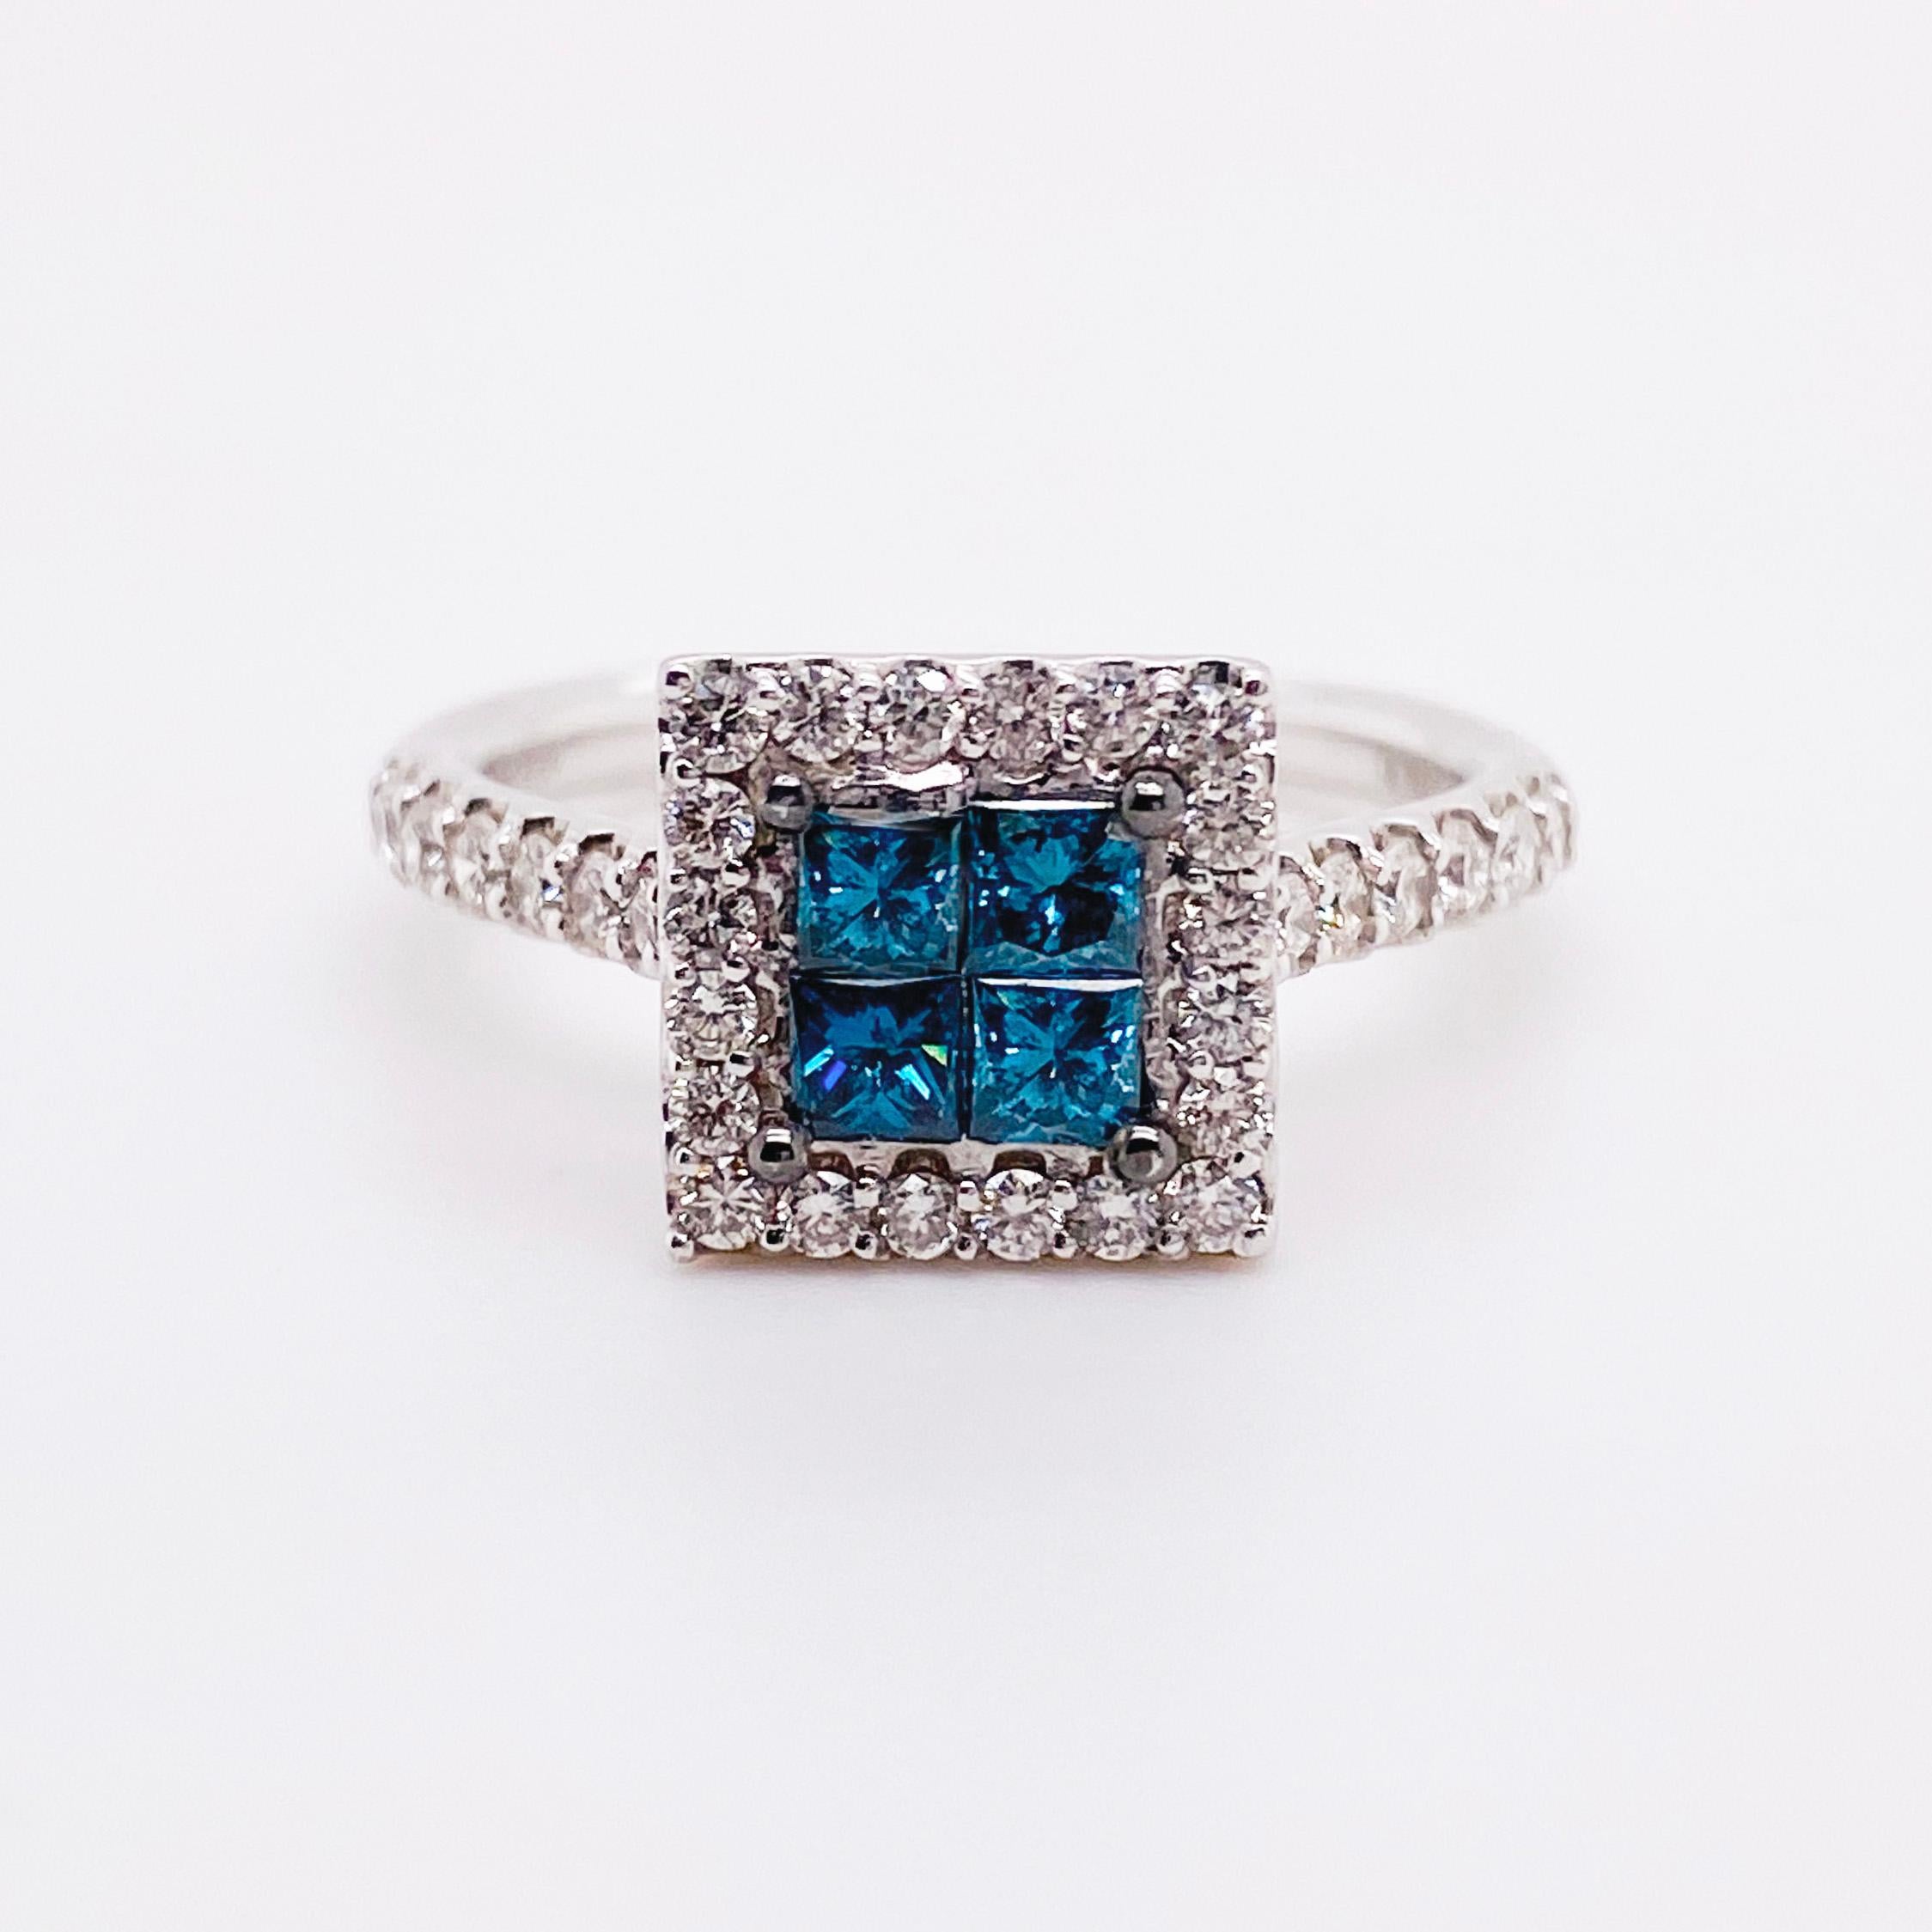 Ocean blue diamond and bright white diamond engagement ring. 
This one of a kind engagement ring you've been wanting. With ocean blue genuine diamonds cut in perfectly shaped princess cuts. The alluring blue diamonds are framed by a bright white